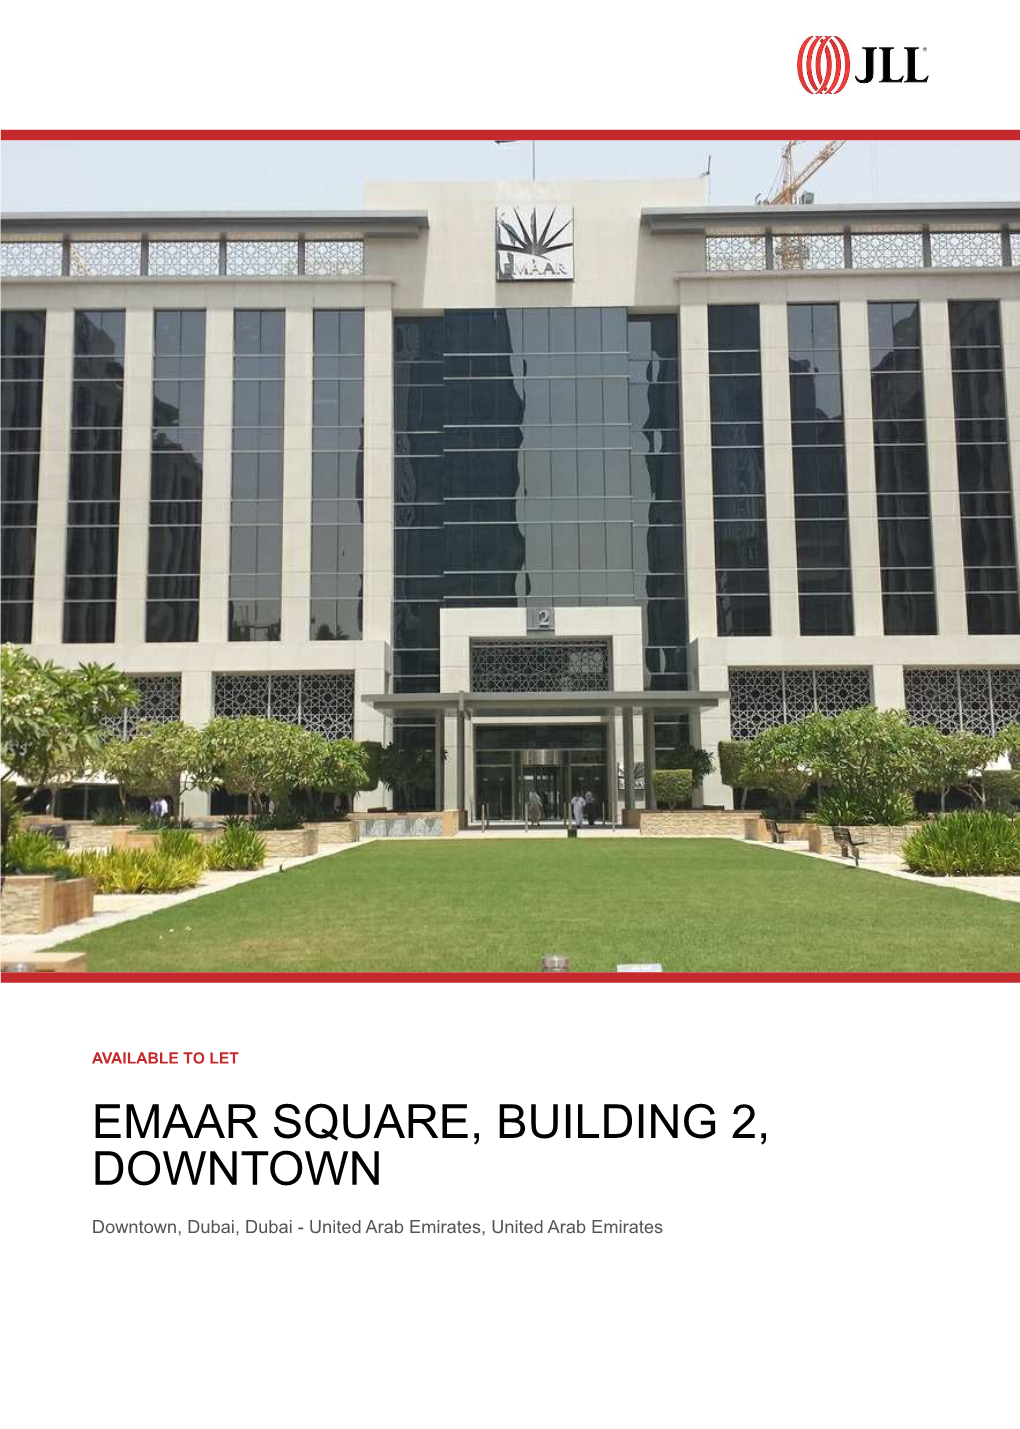 Emaar Square, Building 2, Downtown